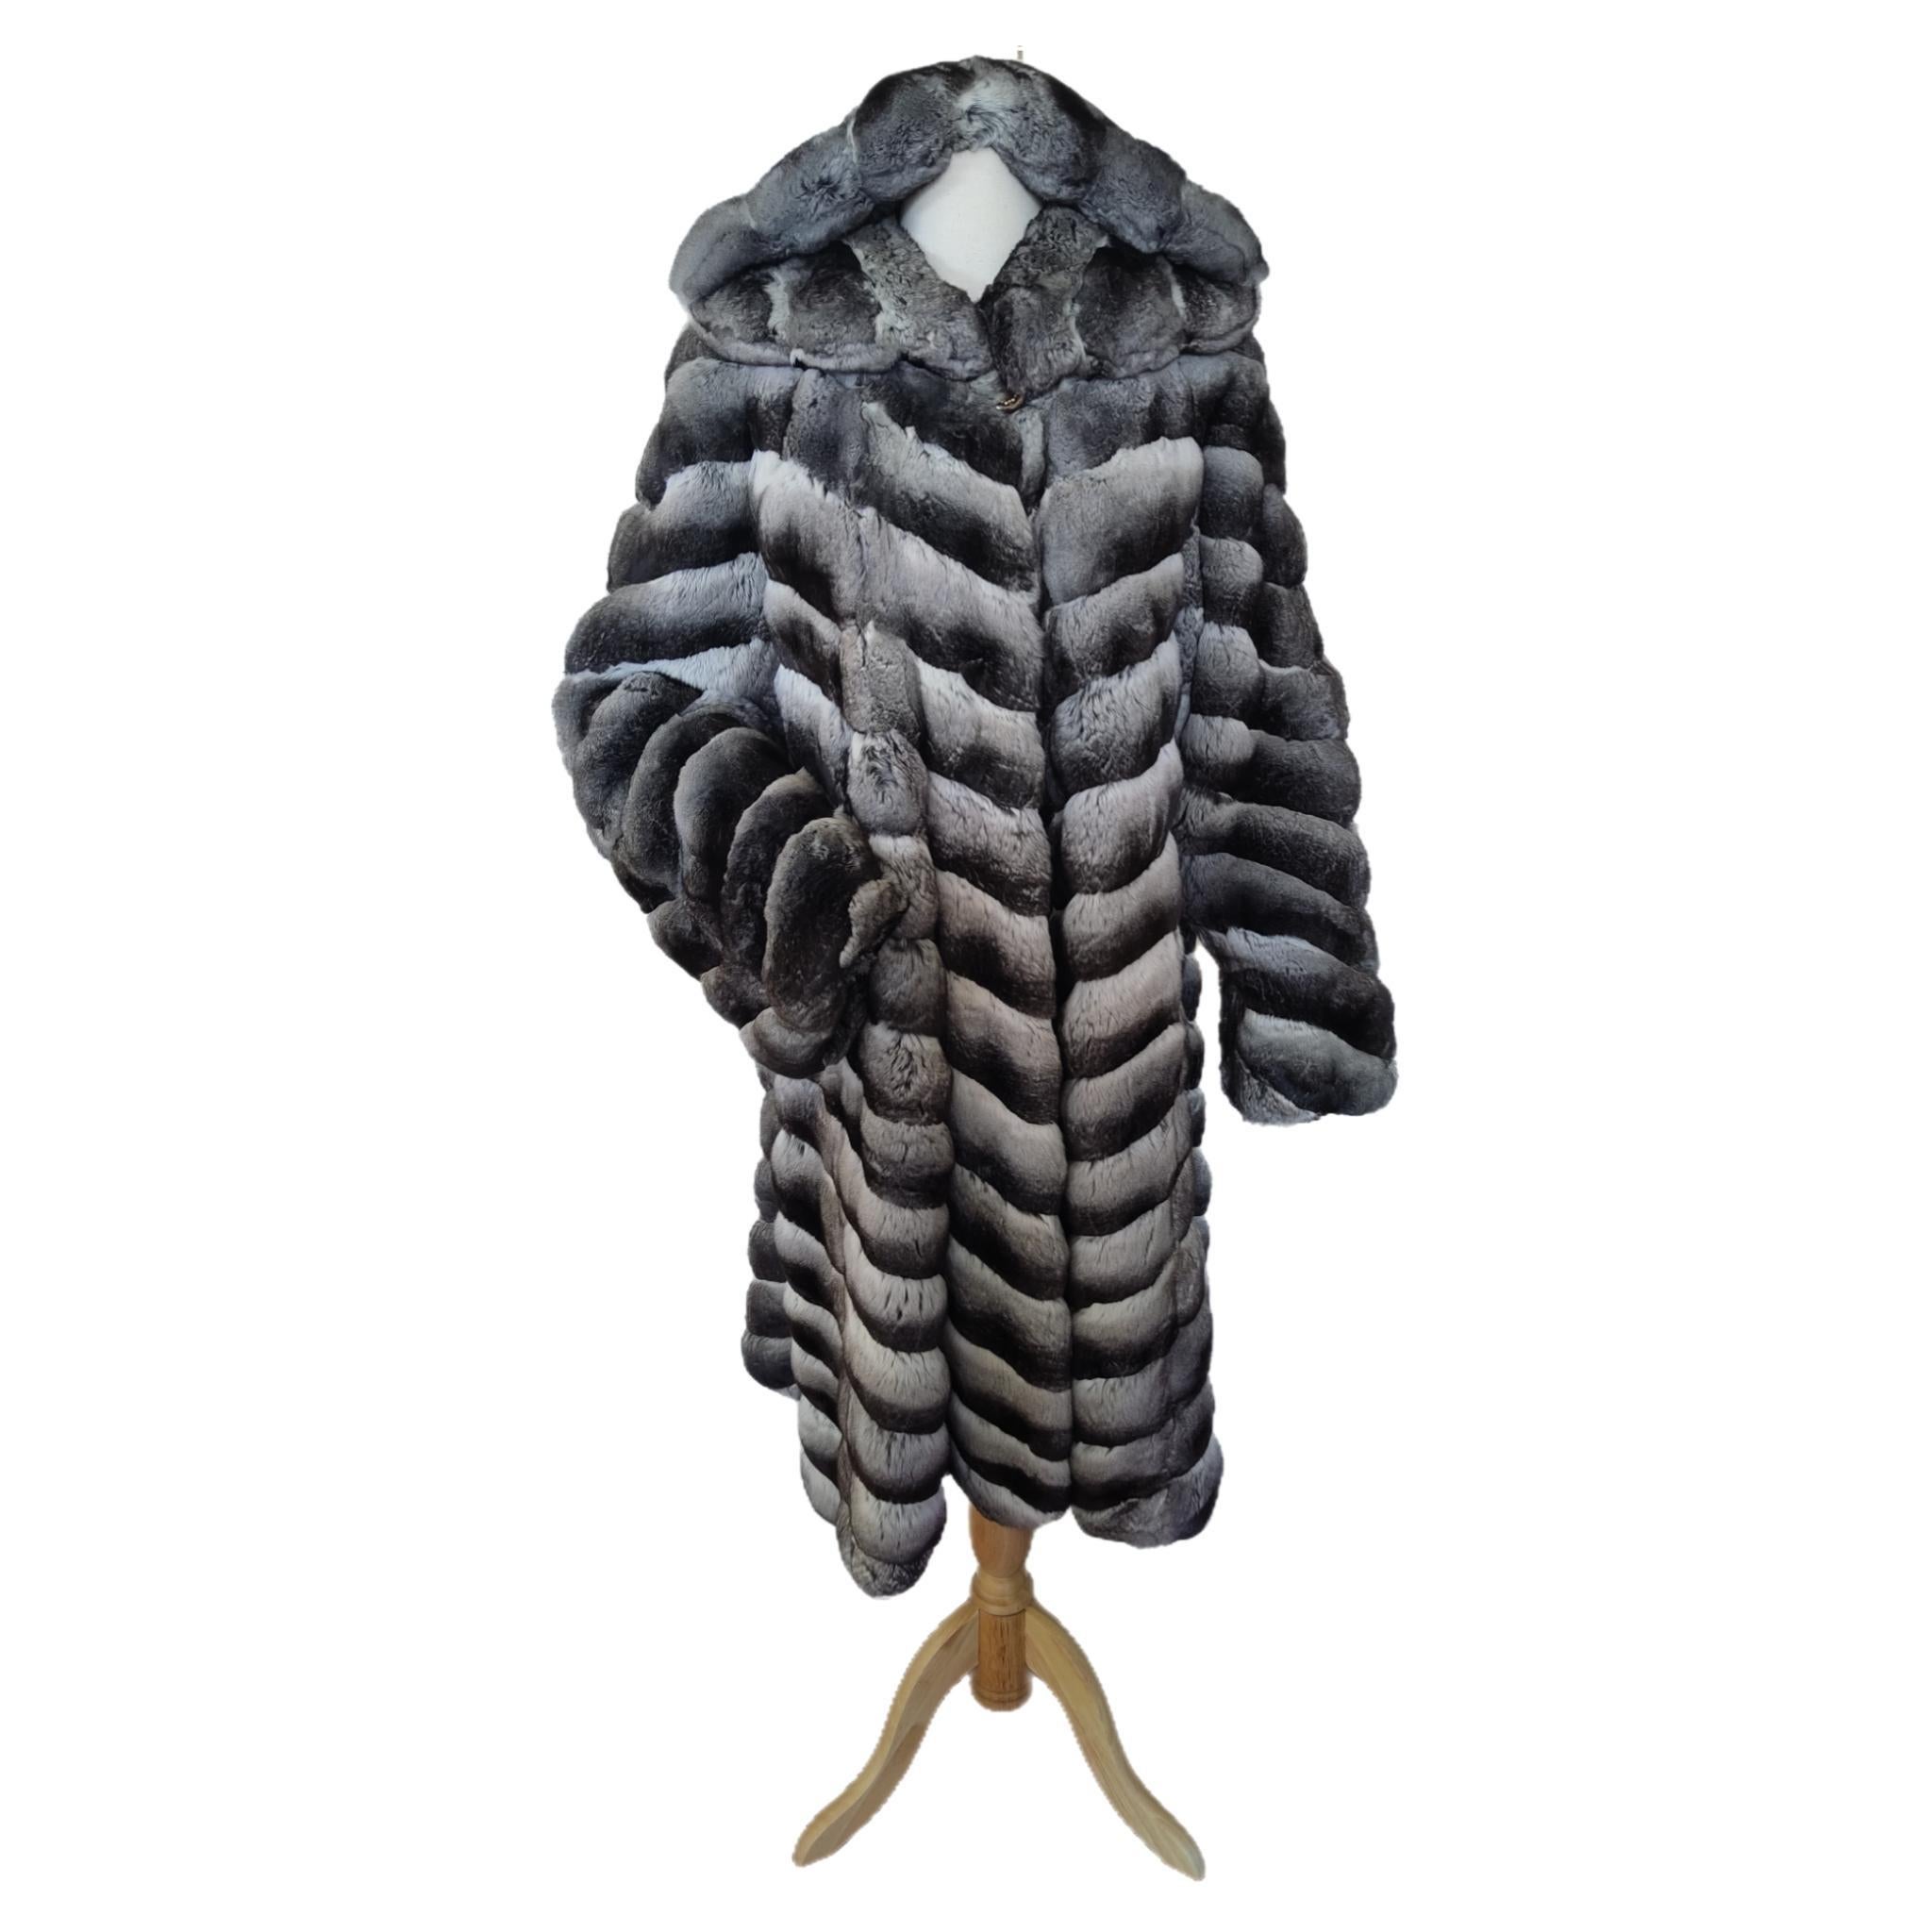 Unused Birger Christensen Empress Chinchilla Fur Coat 12 - 18 L 

Renowned Birger Christensen furriers
Empress chinchilla label
This beautiful coat has a short collar attached to a full double fur hood dollmam  sleeves, German clasps for closure and